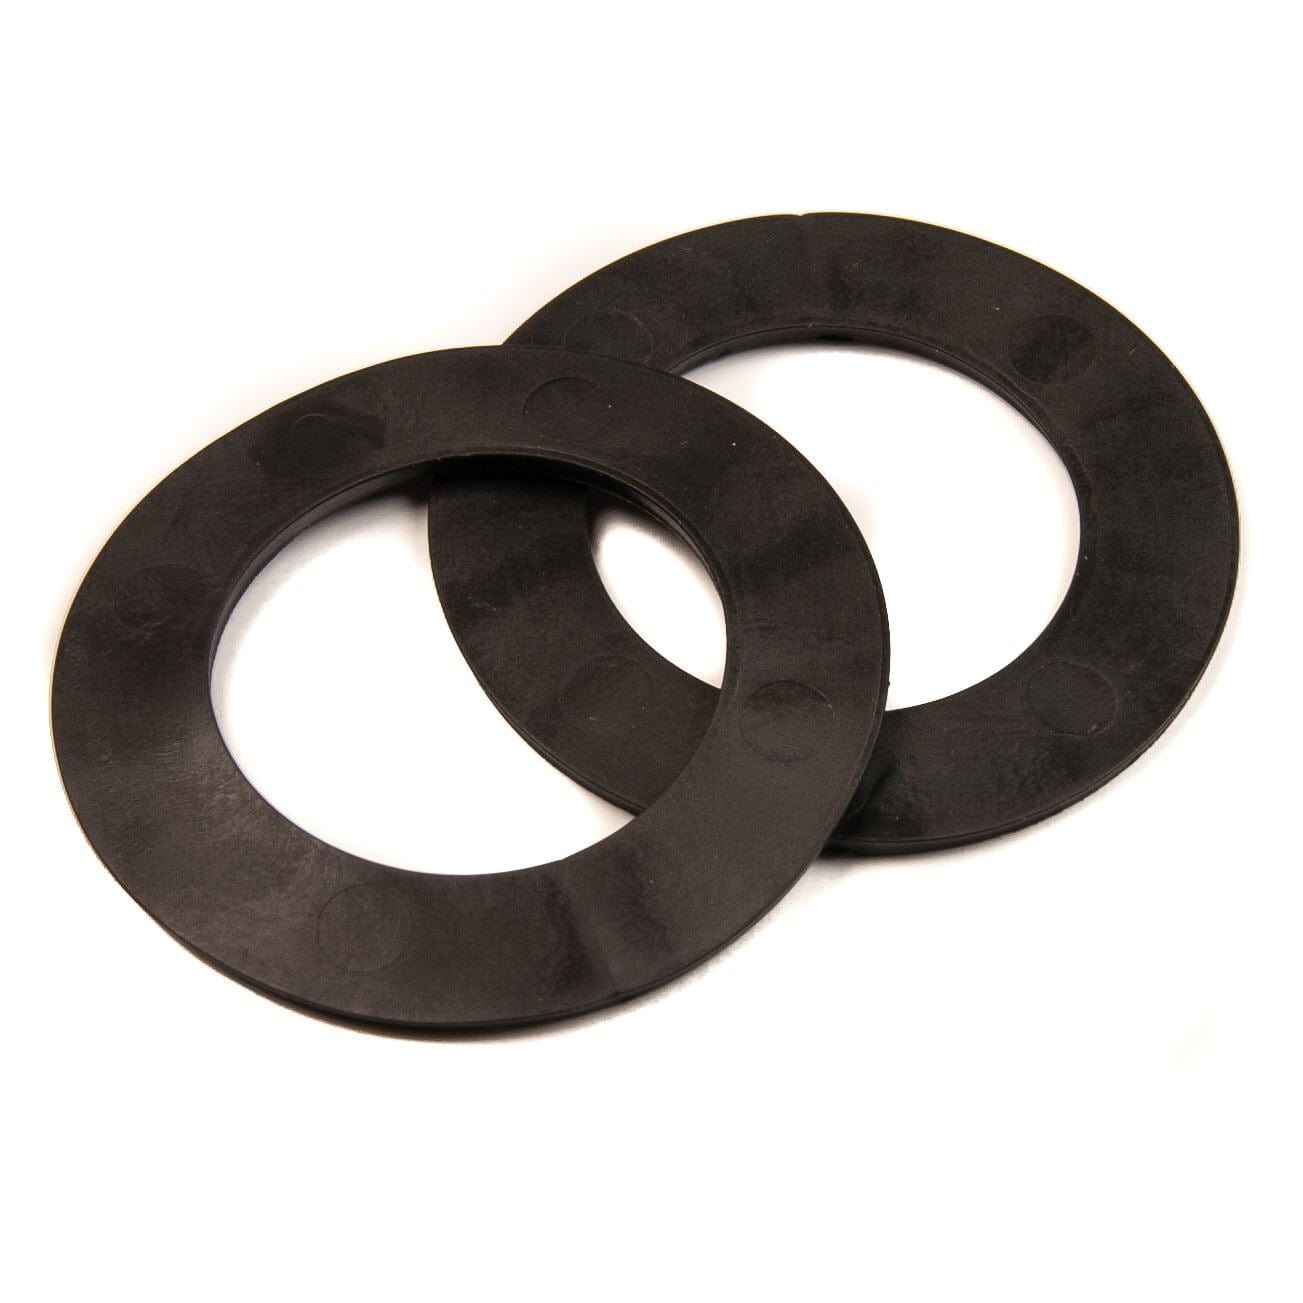 Pillar Tap Washer Rubber 3/4" BSP 29mm Center (Pack of 2) Tap Washers Thunderfix 100463